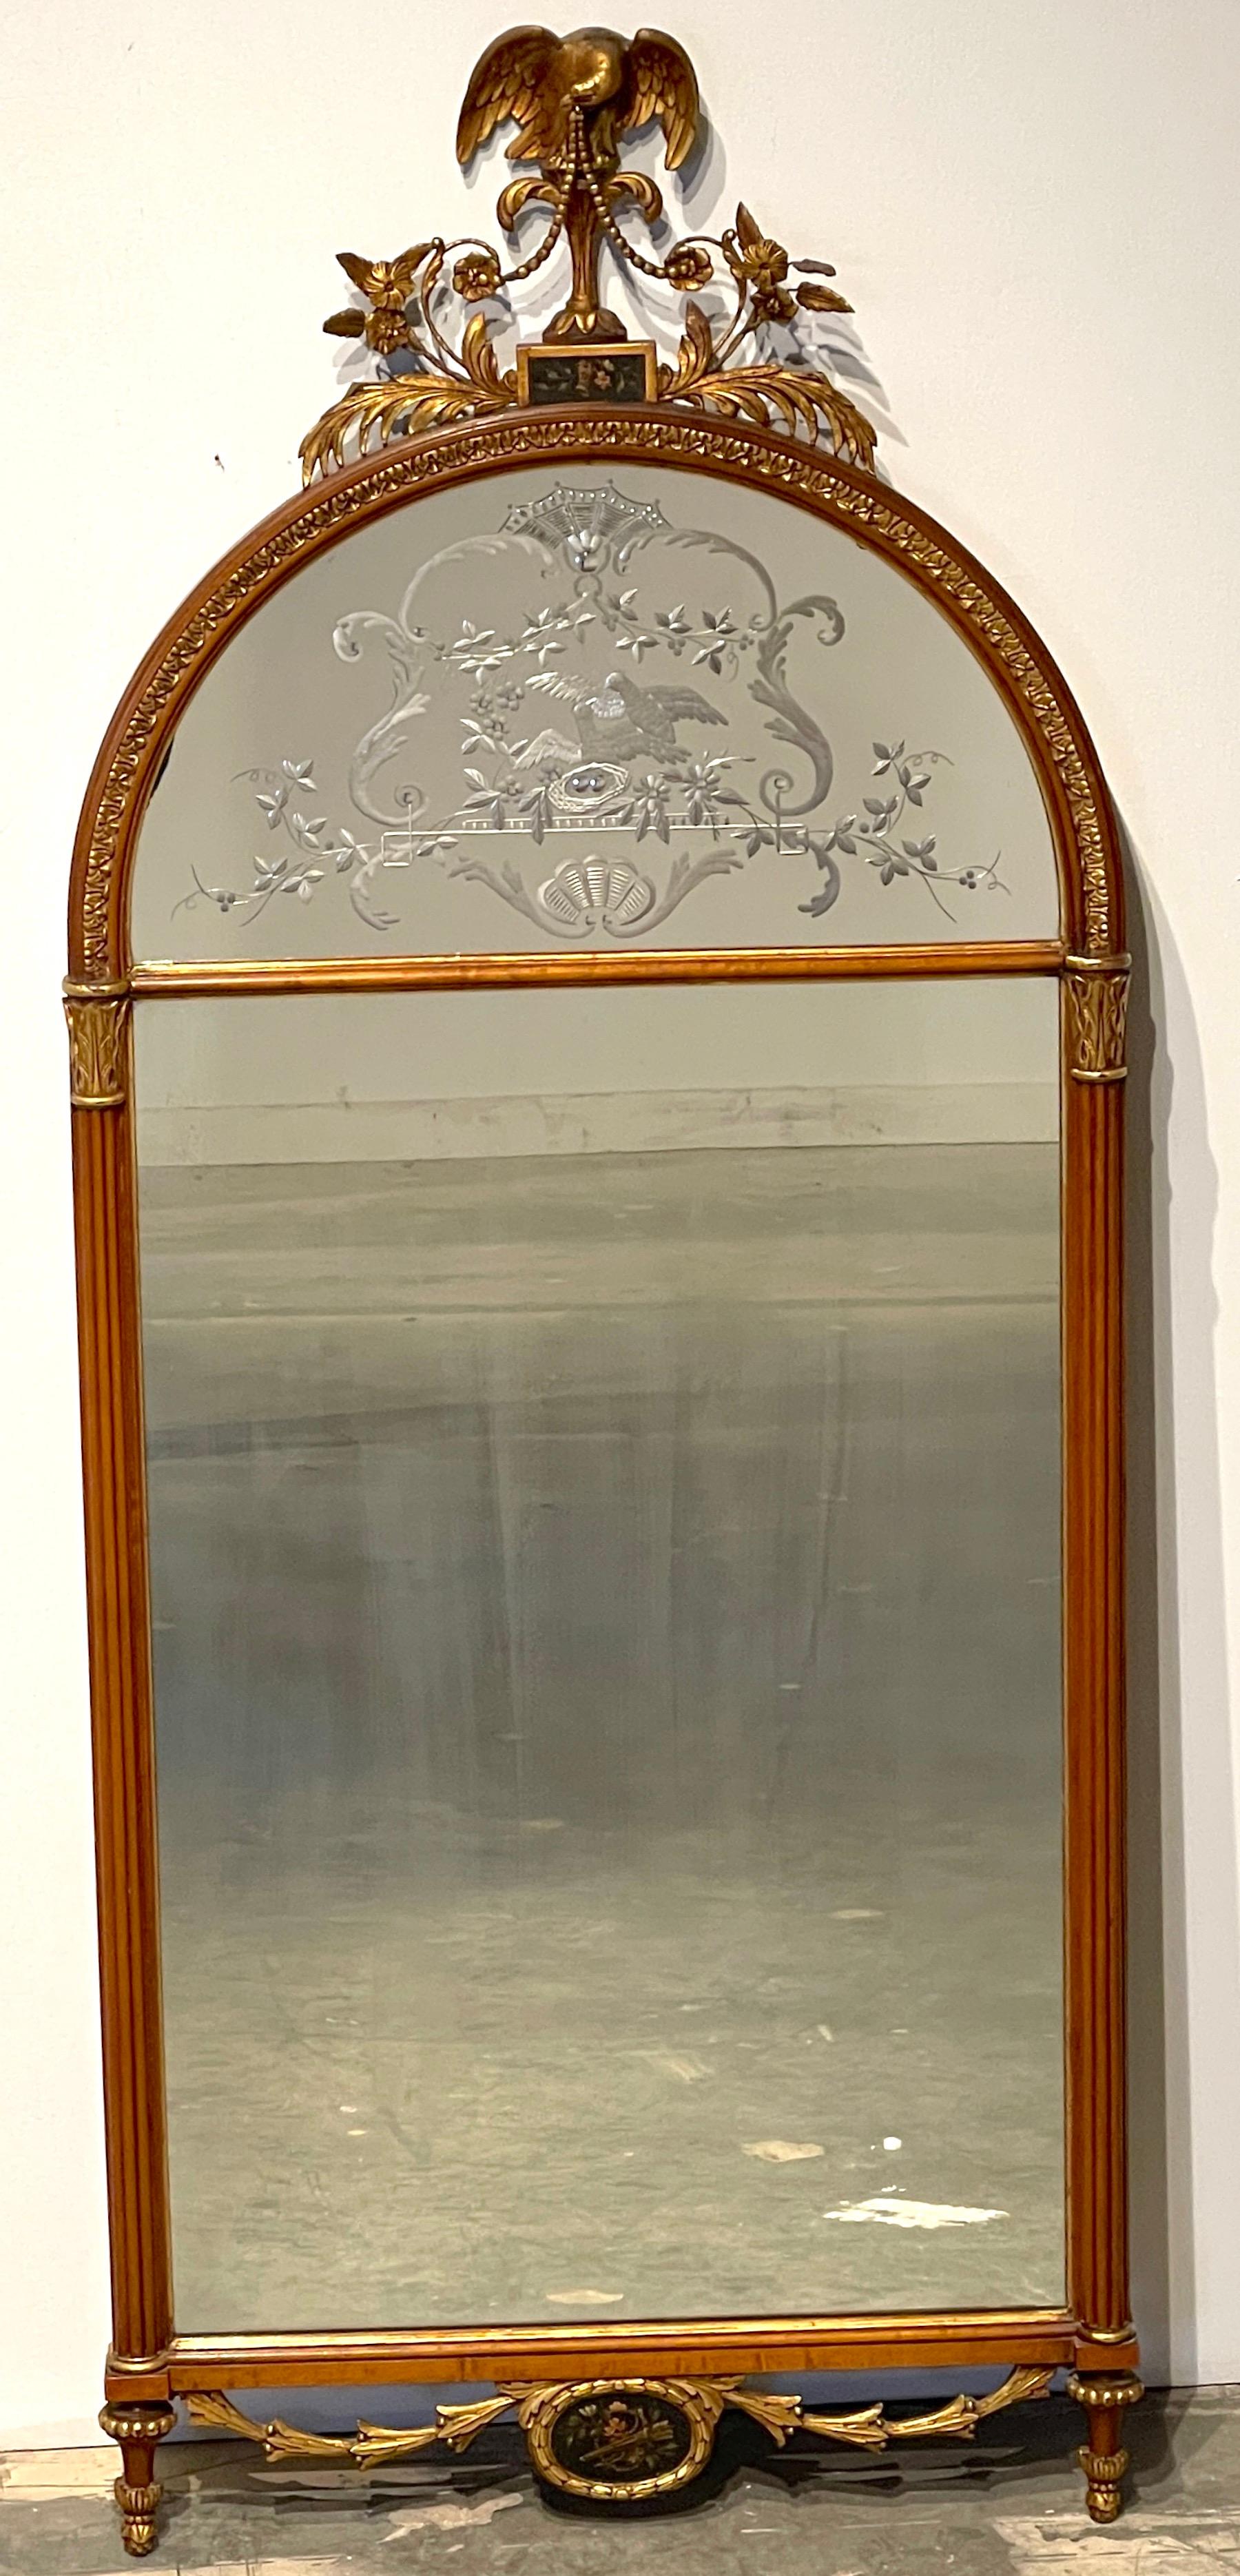 Stunning Adams Style Carved & Painted Satinwood Engraved mirror
England, 1925 

A fine example of an early 20th century English Adam style mirror, featuring numerous signature elements. The top is adorned with a finely carved giltwood eagle with